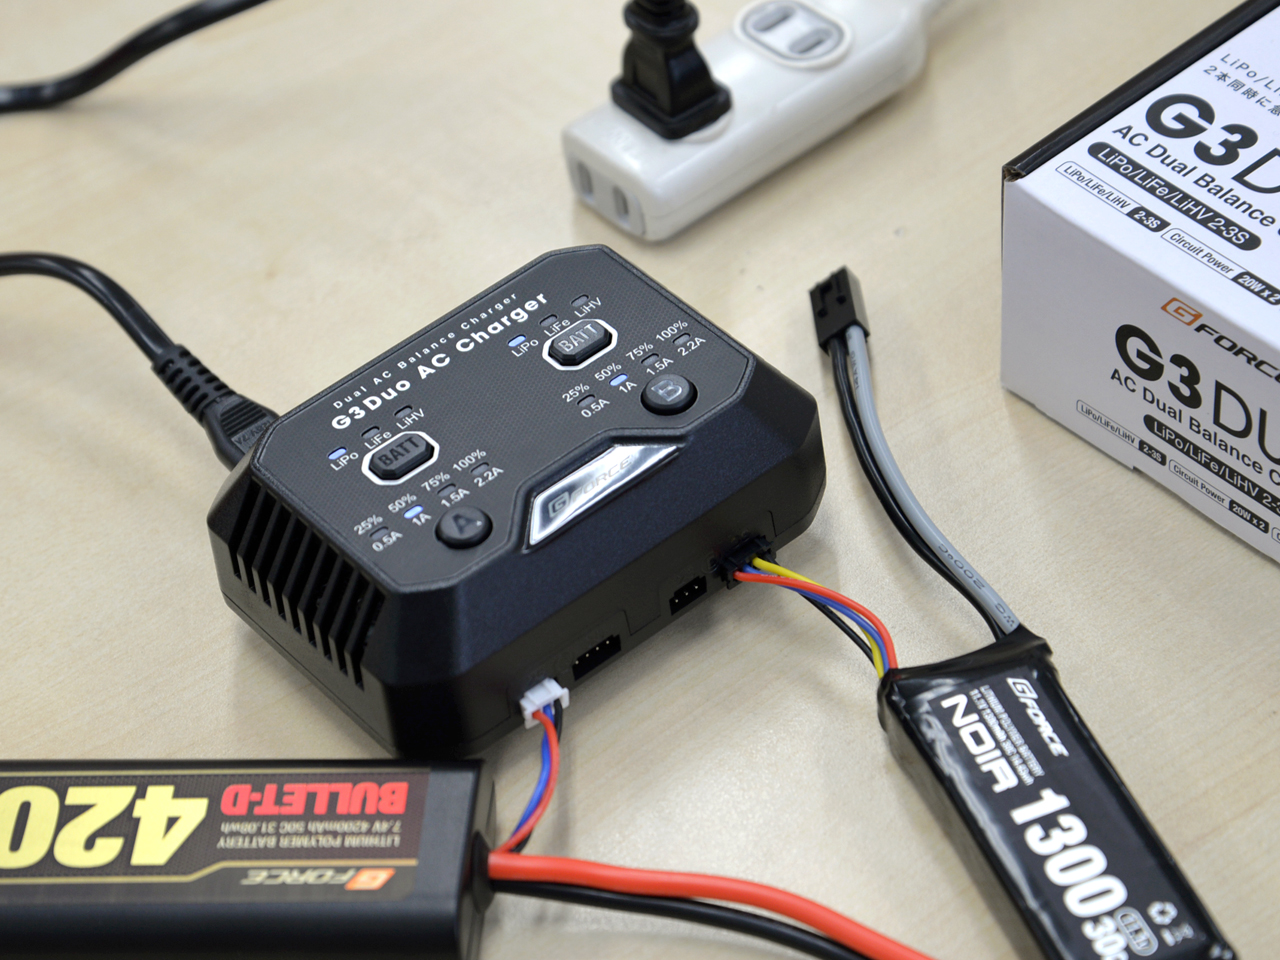 G-FORCE G3 DUO LiPo/LiFe AC専用充電器(2-3セル） G3 DUO CHARGER　G0318